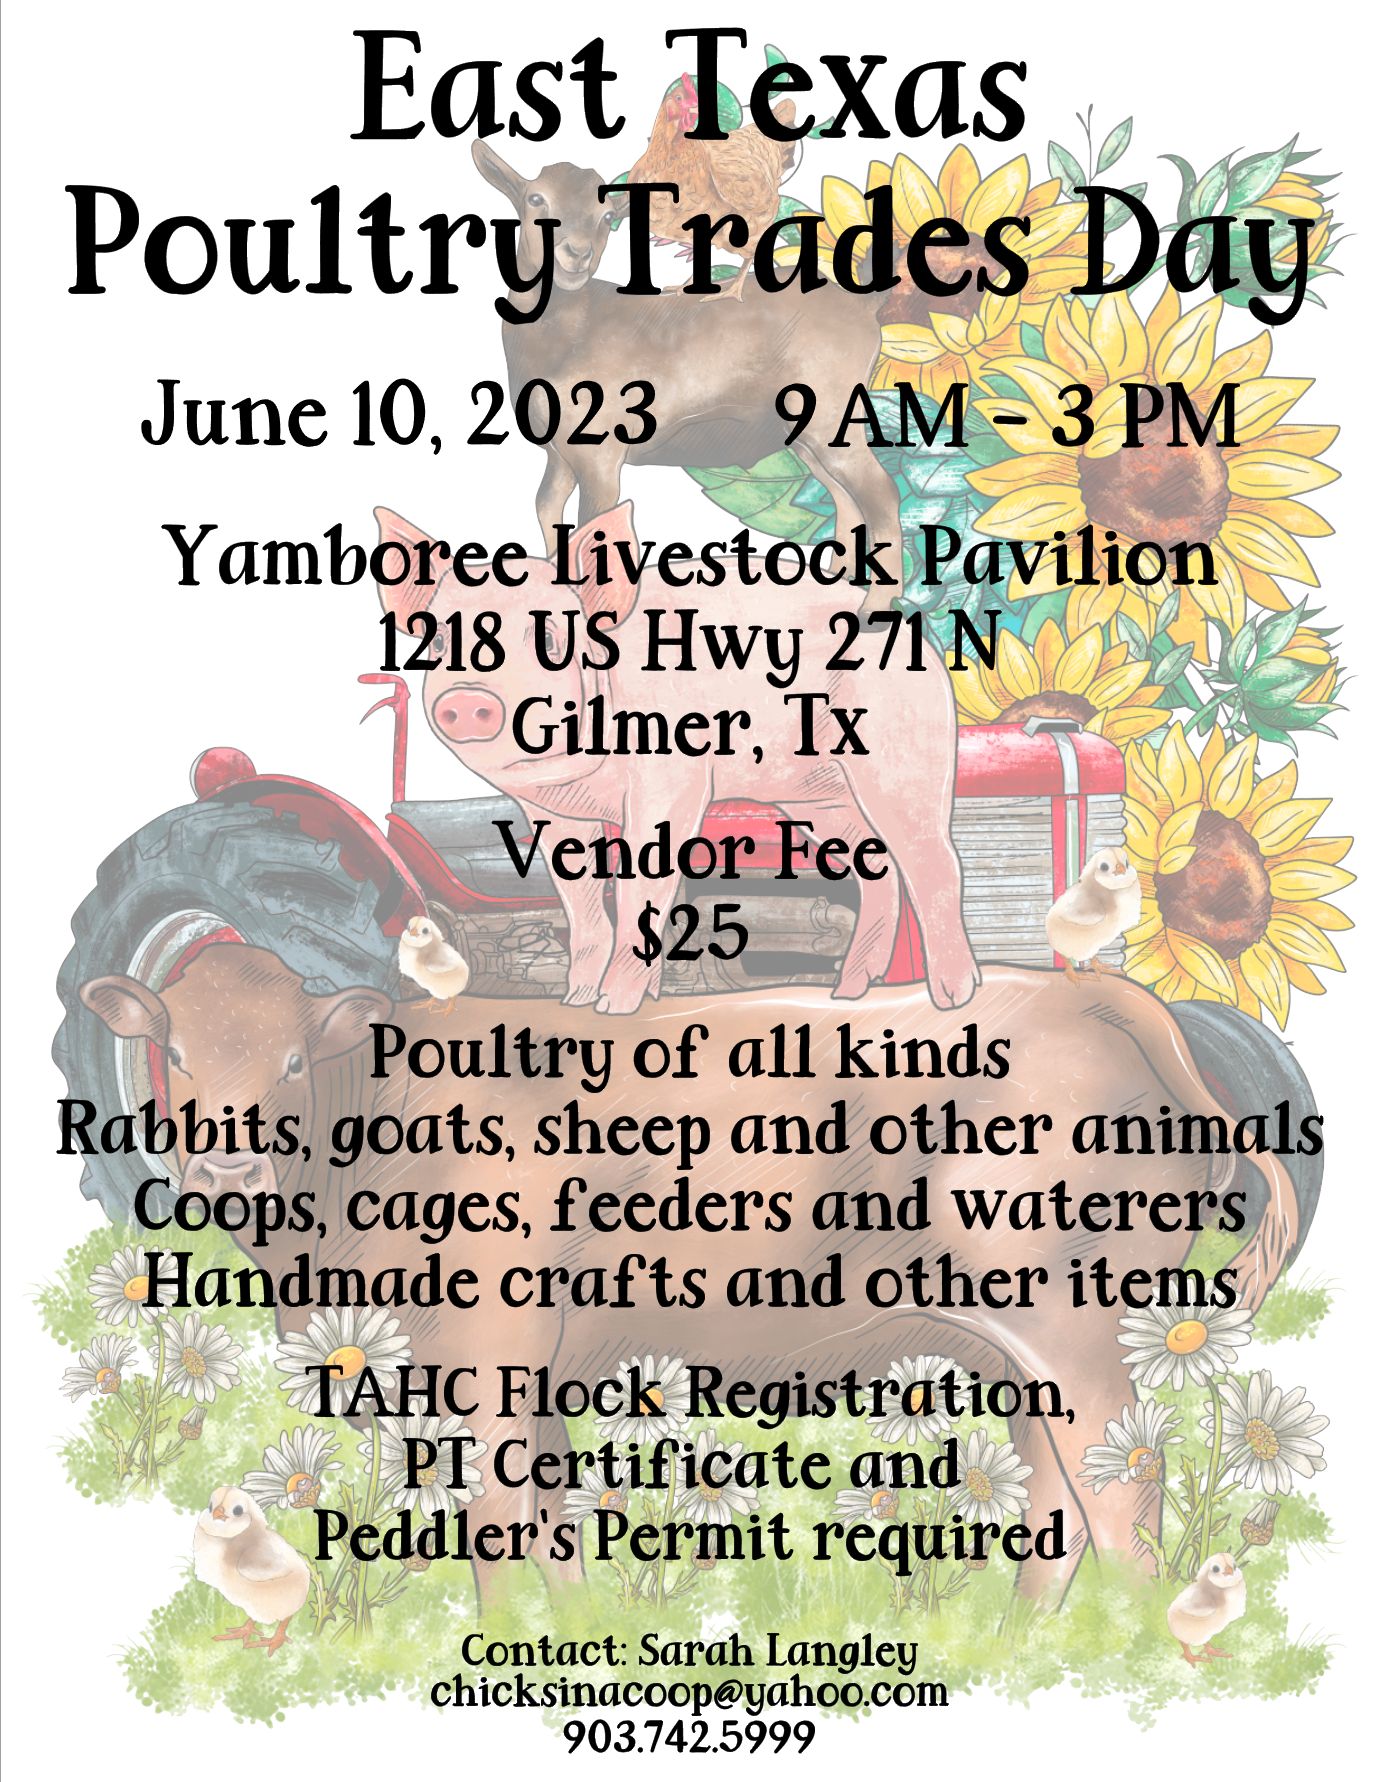 East Texas Poultry Trades Day